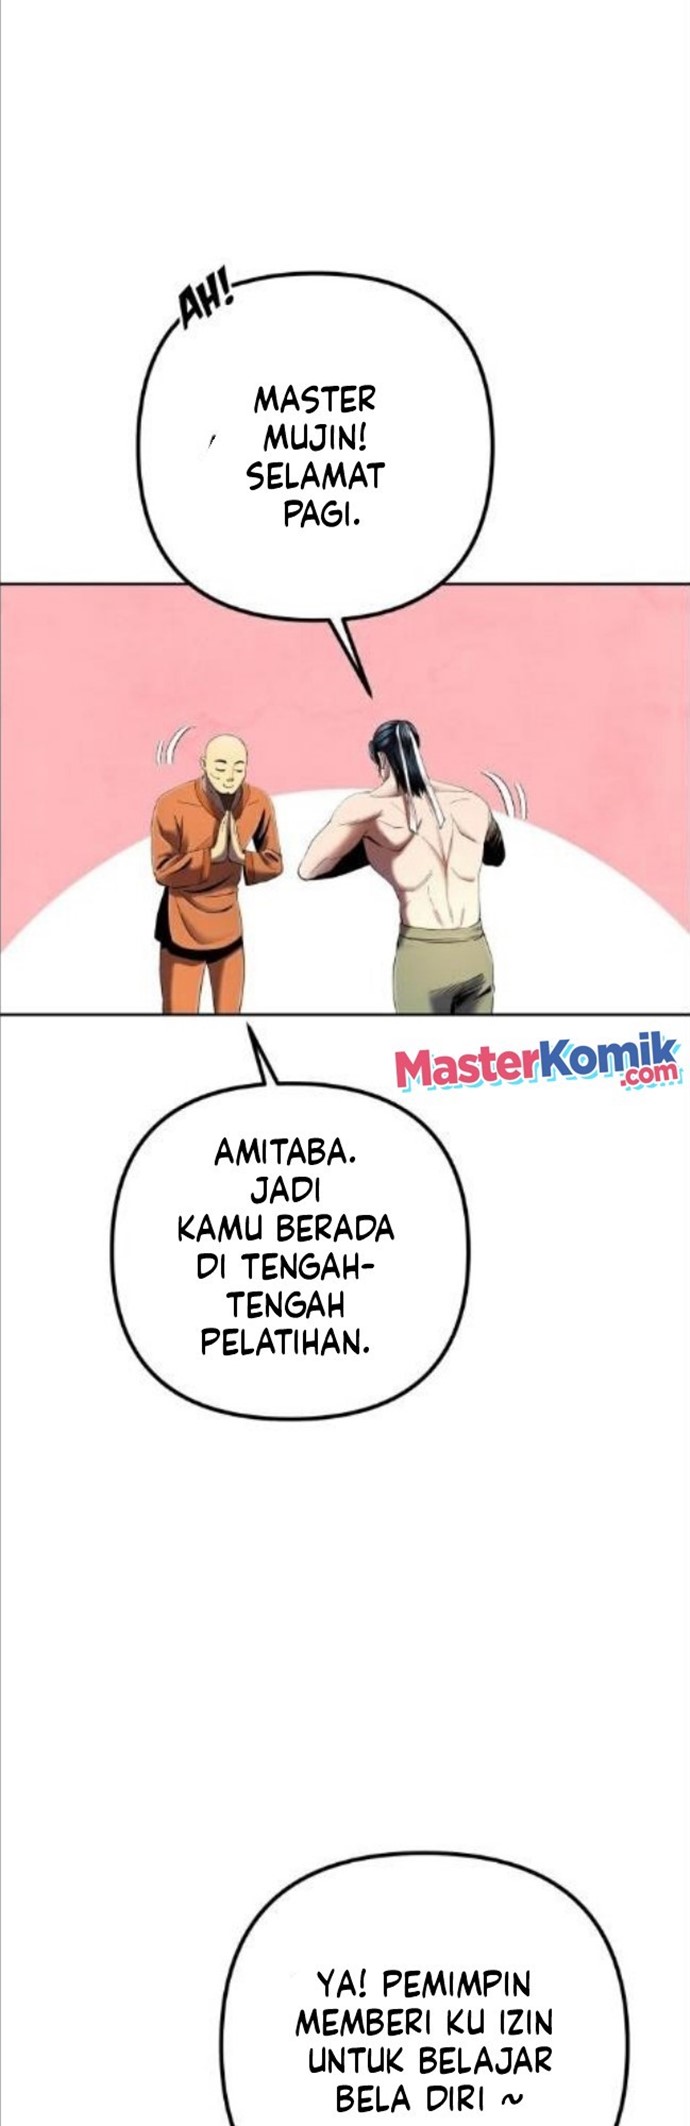 Revenge Of Young Master Peng Chapter 30